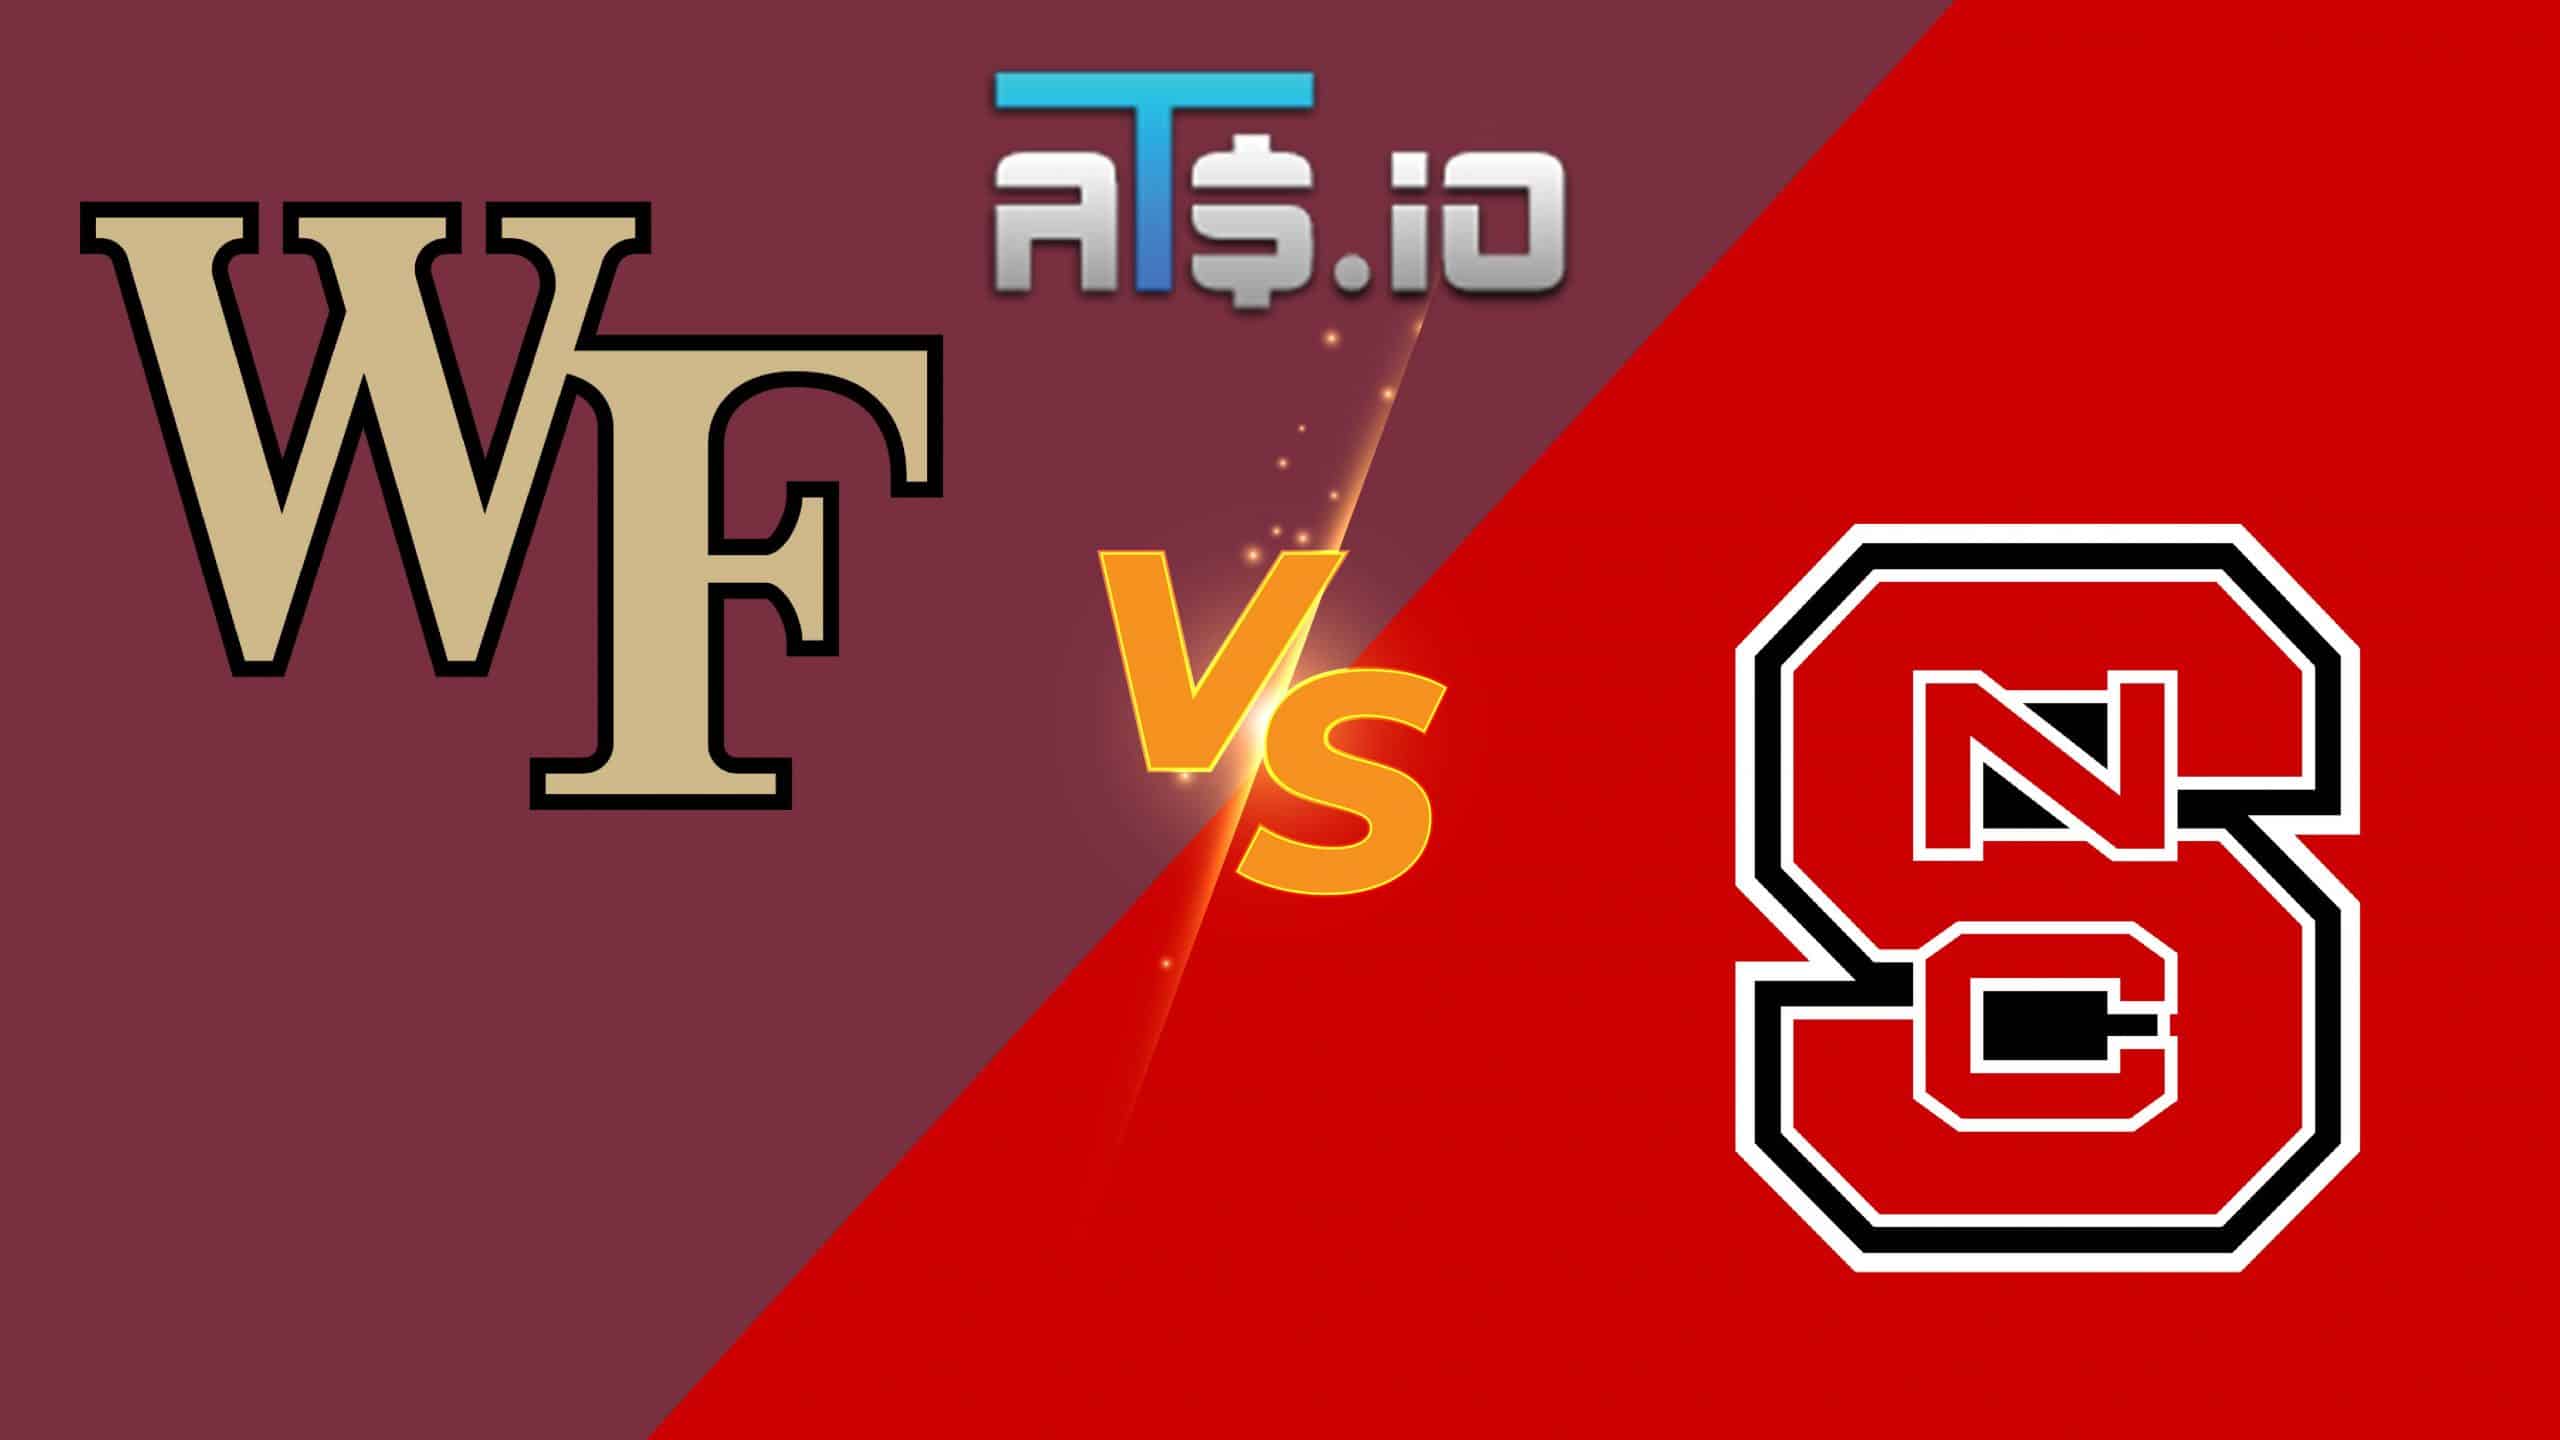 wake forest vs nc state